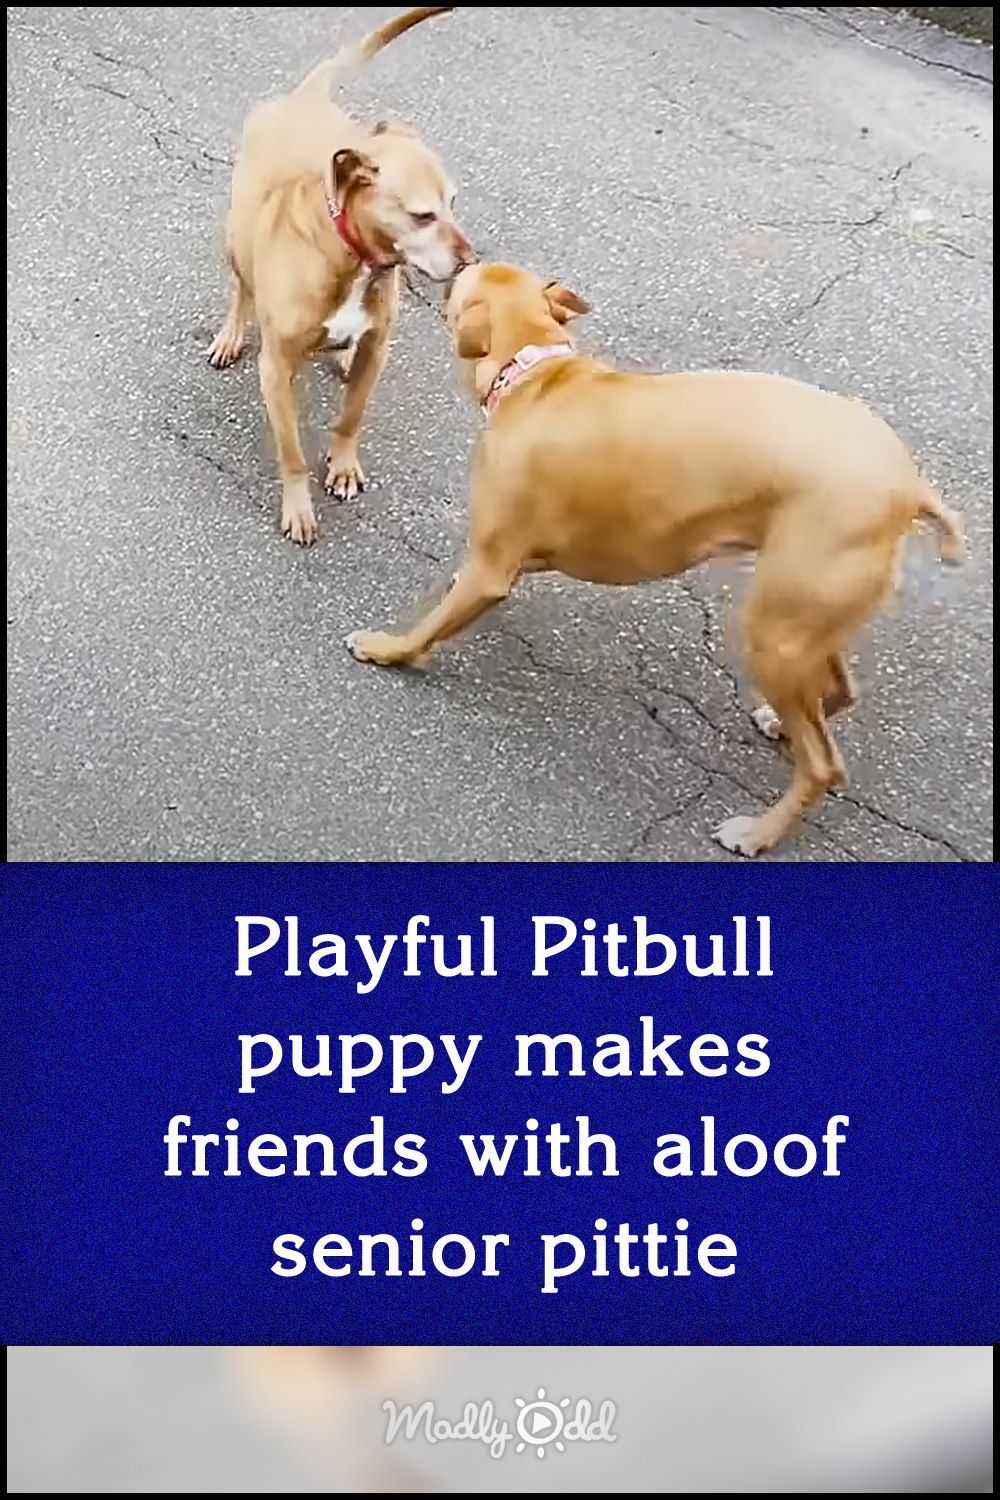 Playful Pitbull puppy makes friends with aloof senior pittie